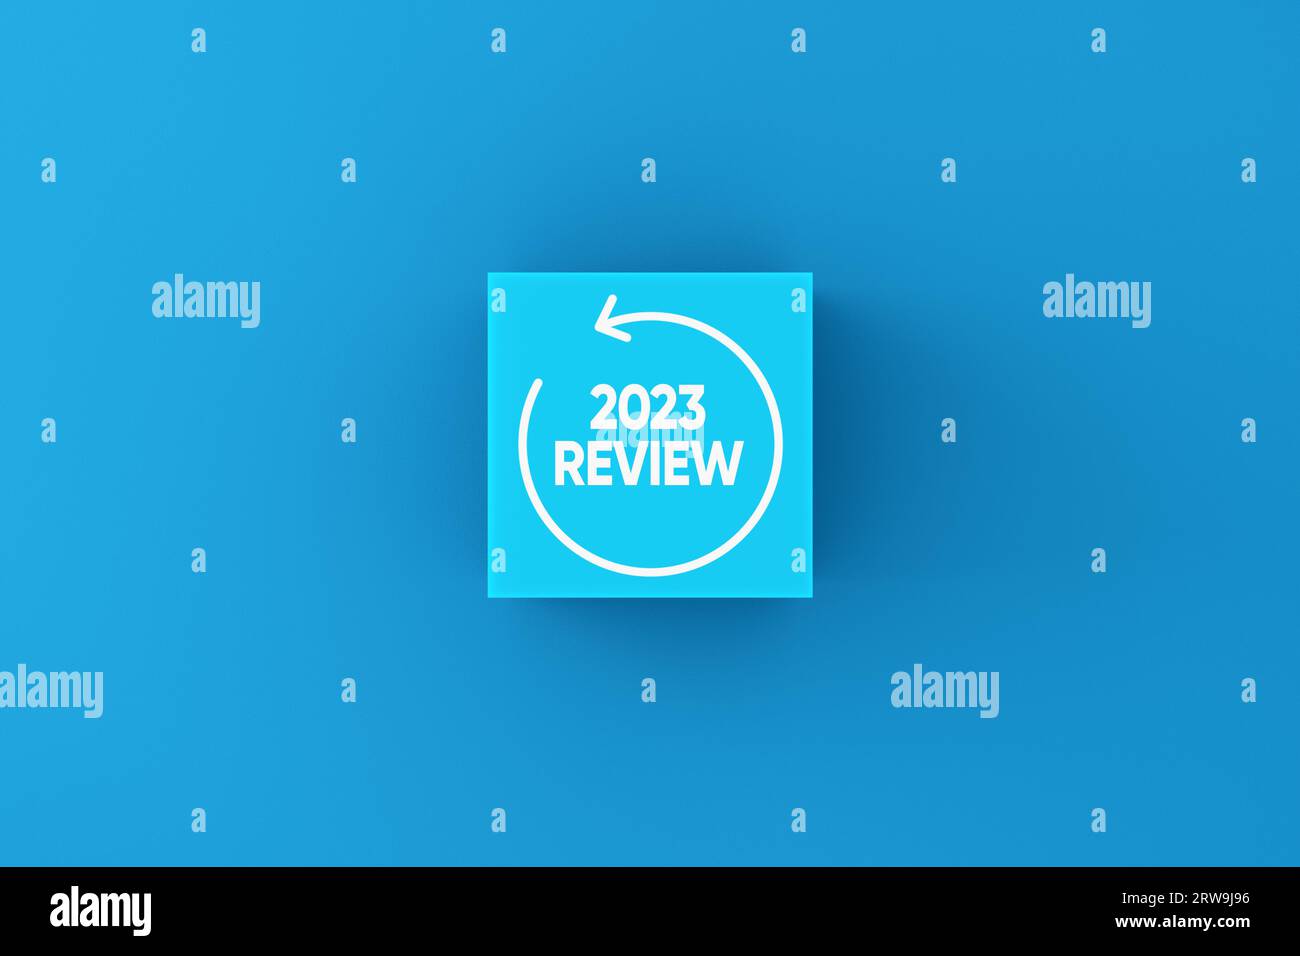 Year 2023 annual business review, analysis and evaluation. The message 2023 review on blue cube. Stock Photo